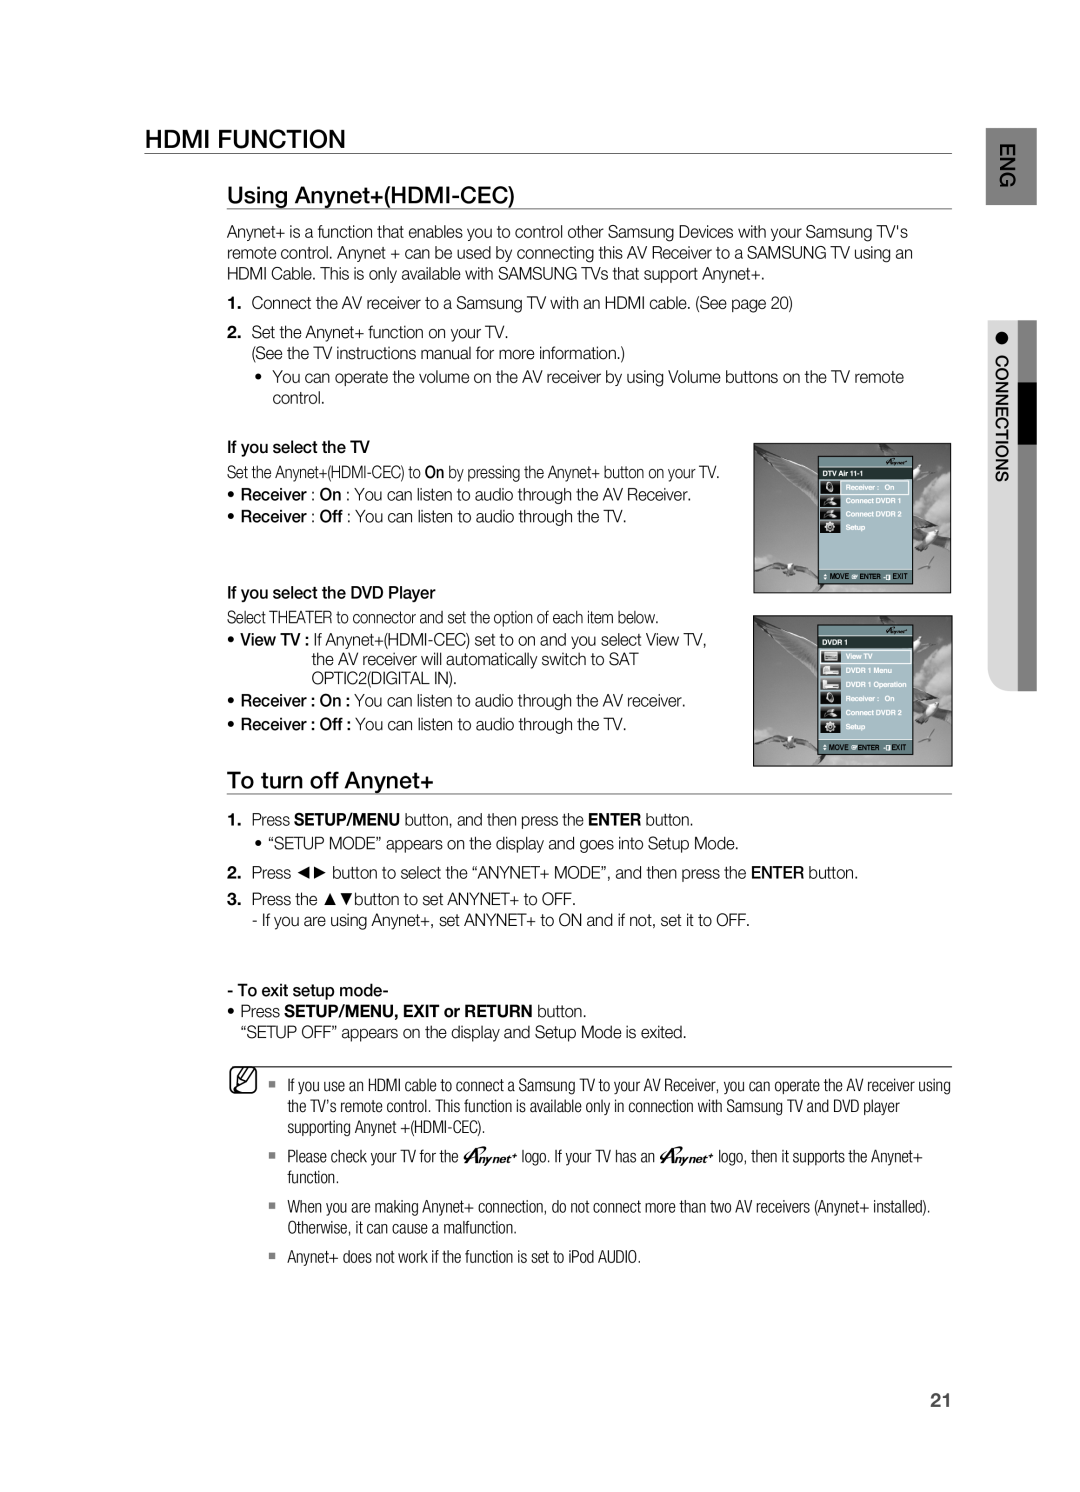 Samsung HT-AS730S user manual Hdmi Function, Using Anynet+HDMI-CEC, To turn off Anynet+ 